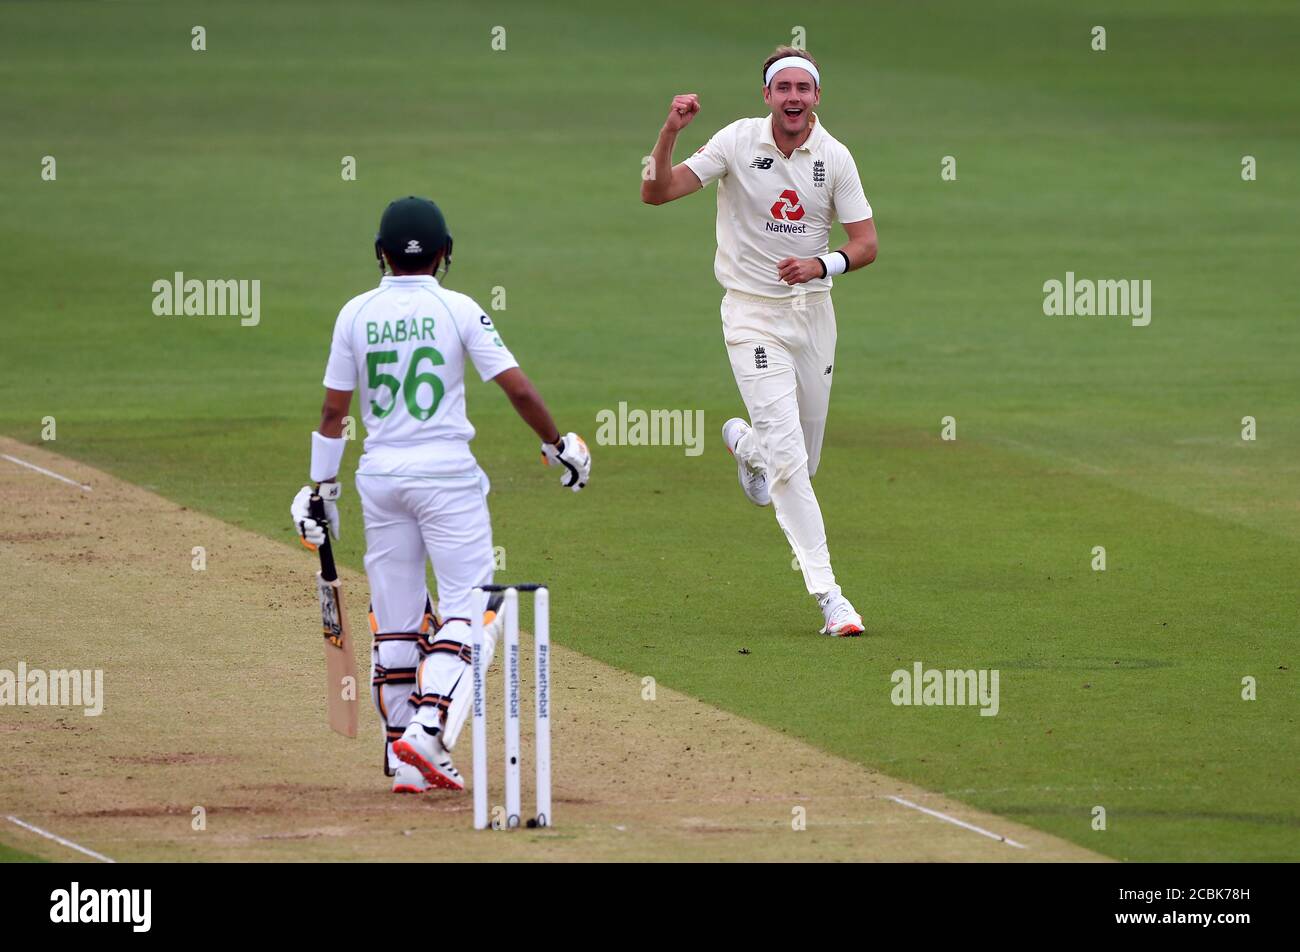 England's Stuart Broad celebrates taking the wicket of Pakistan's Babar Azam during day two of the Second Test match at the Ageas Bowl, Southampton. Stock Photo